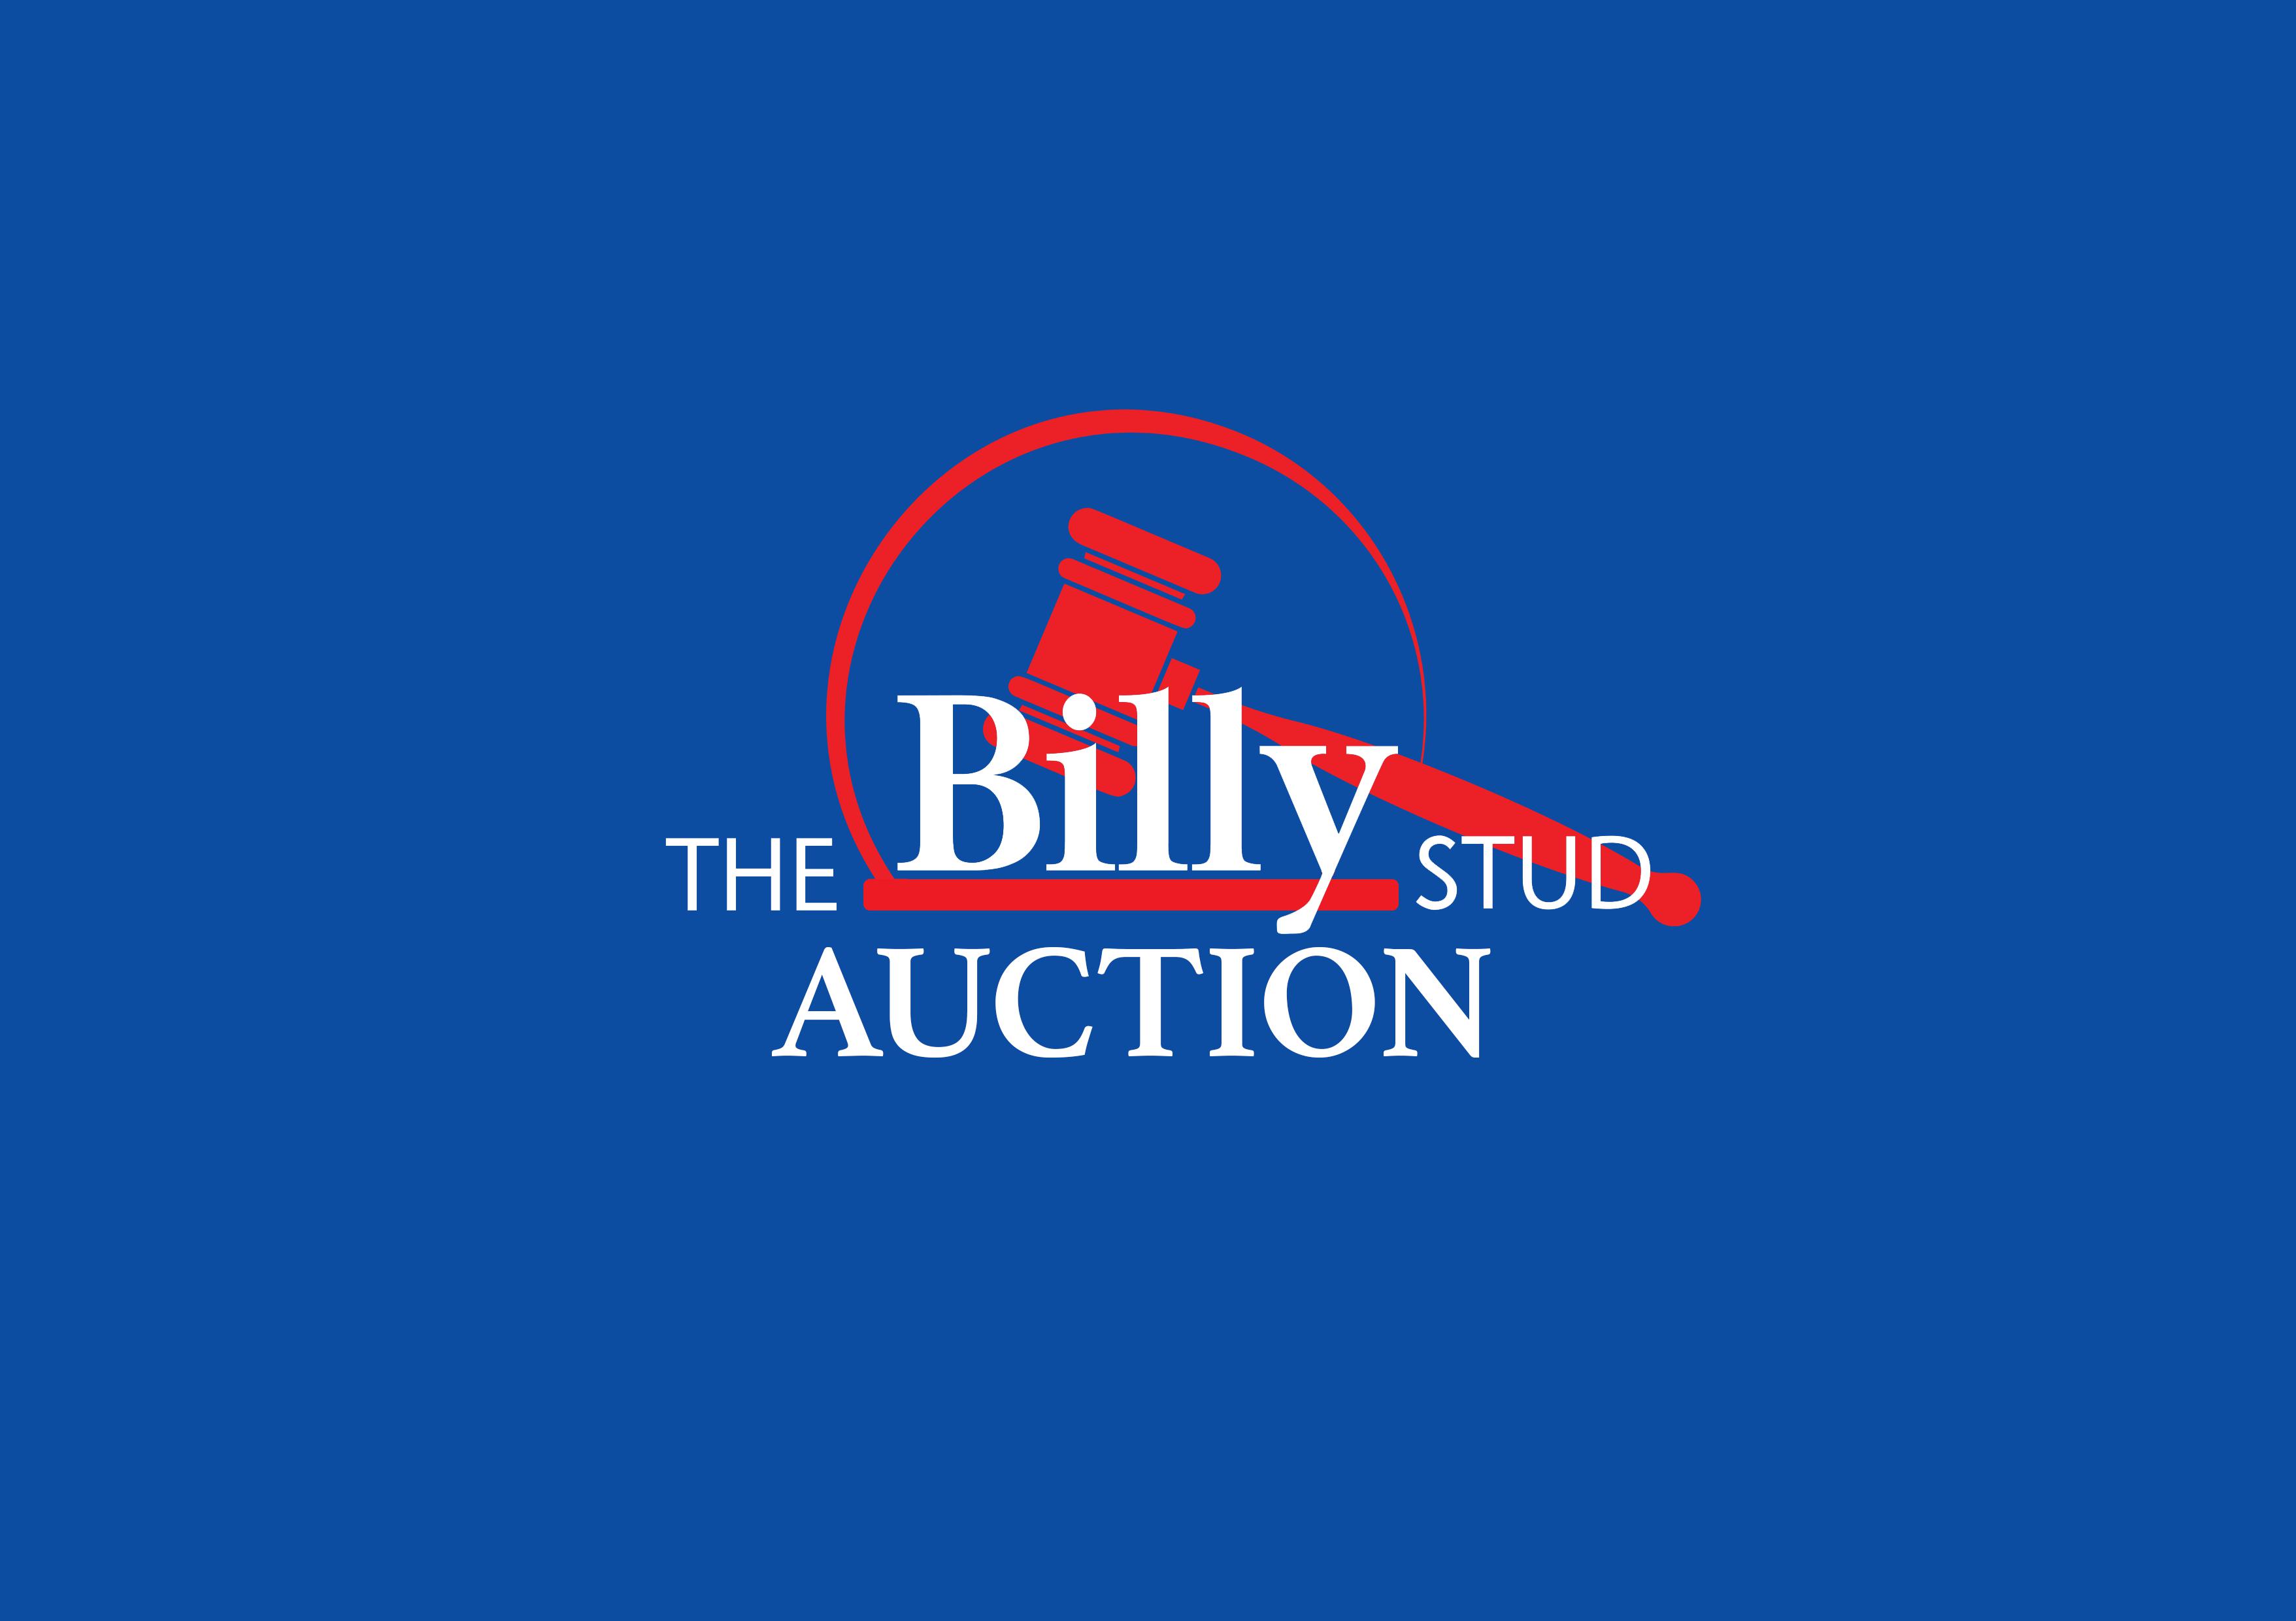 Billy Stud Auction 